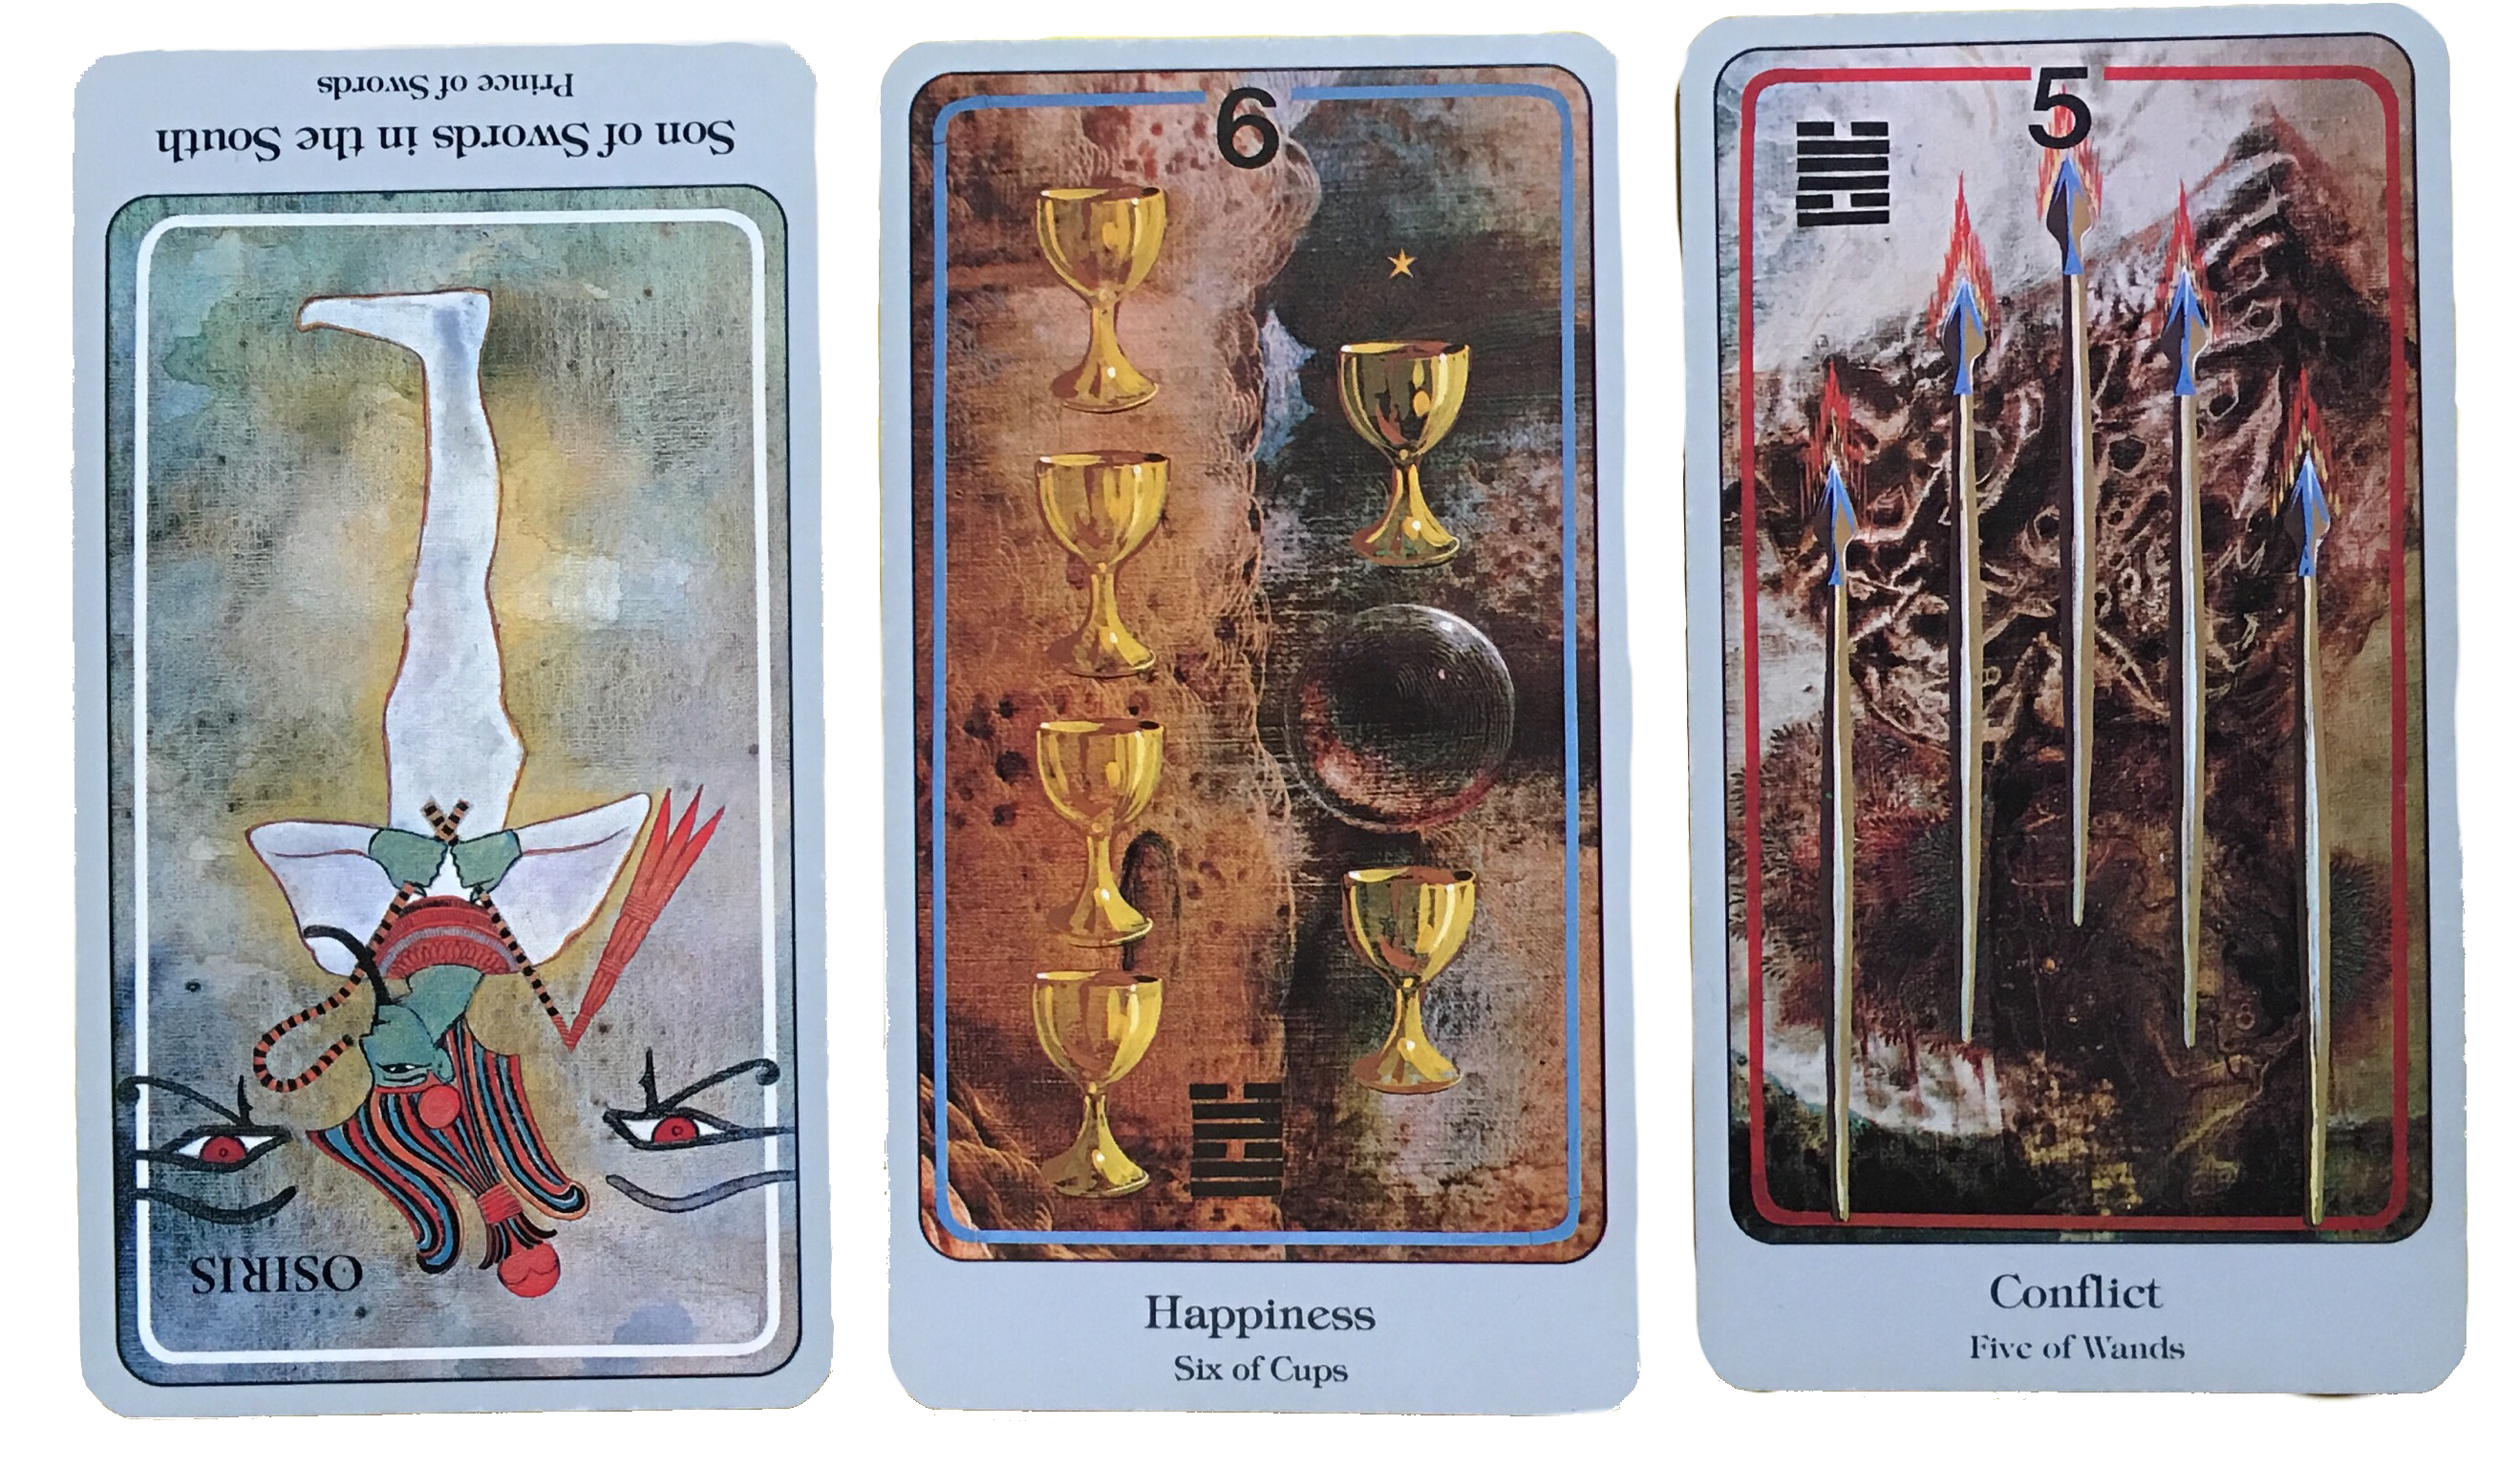 TAROT TUESDAY: The quiet, internal revolution is the first step on the way to the liberation of all.